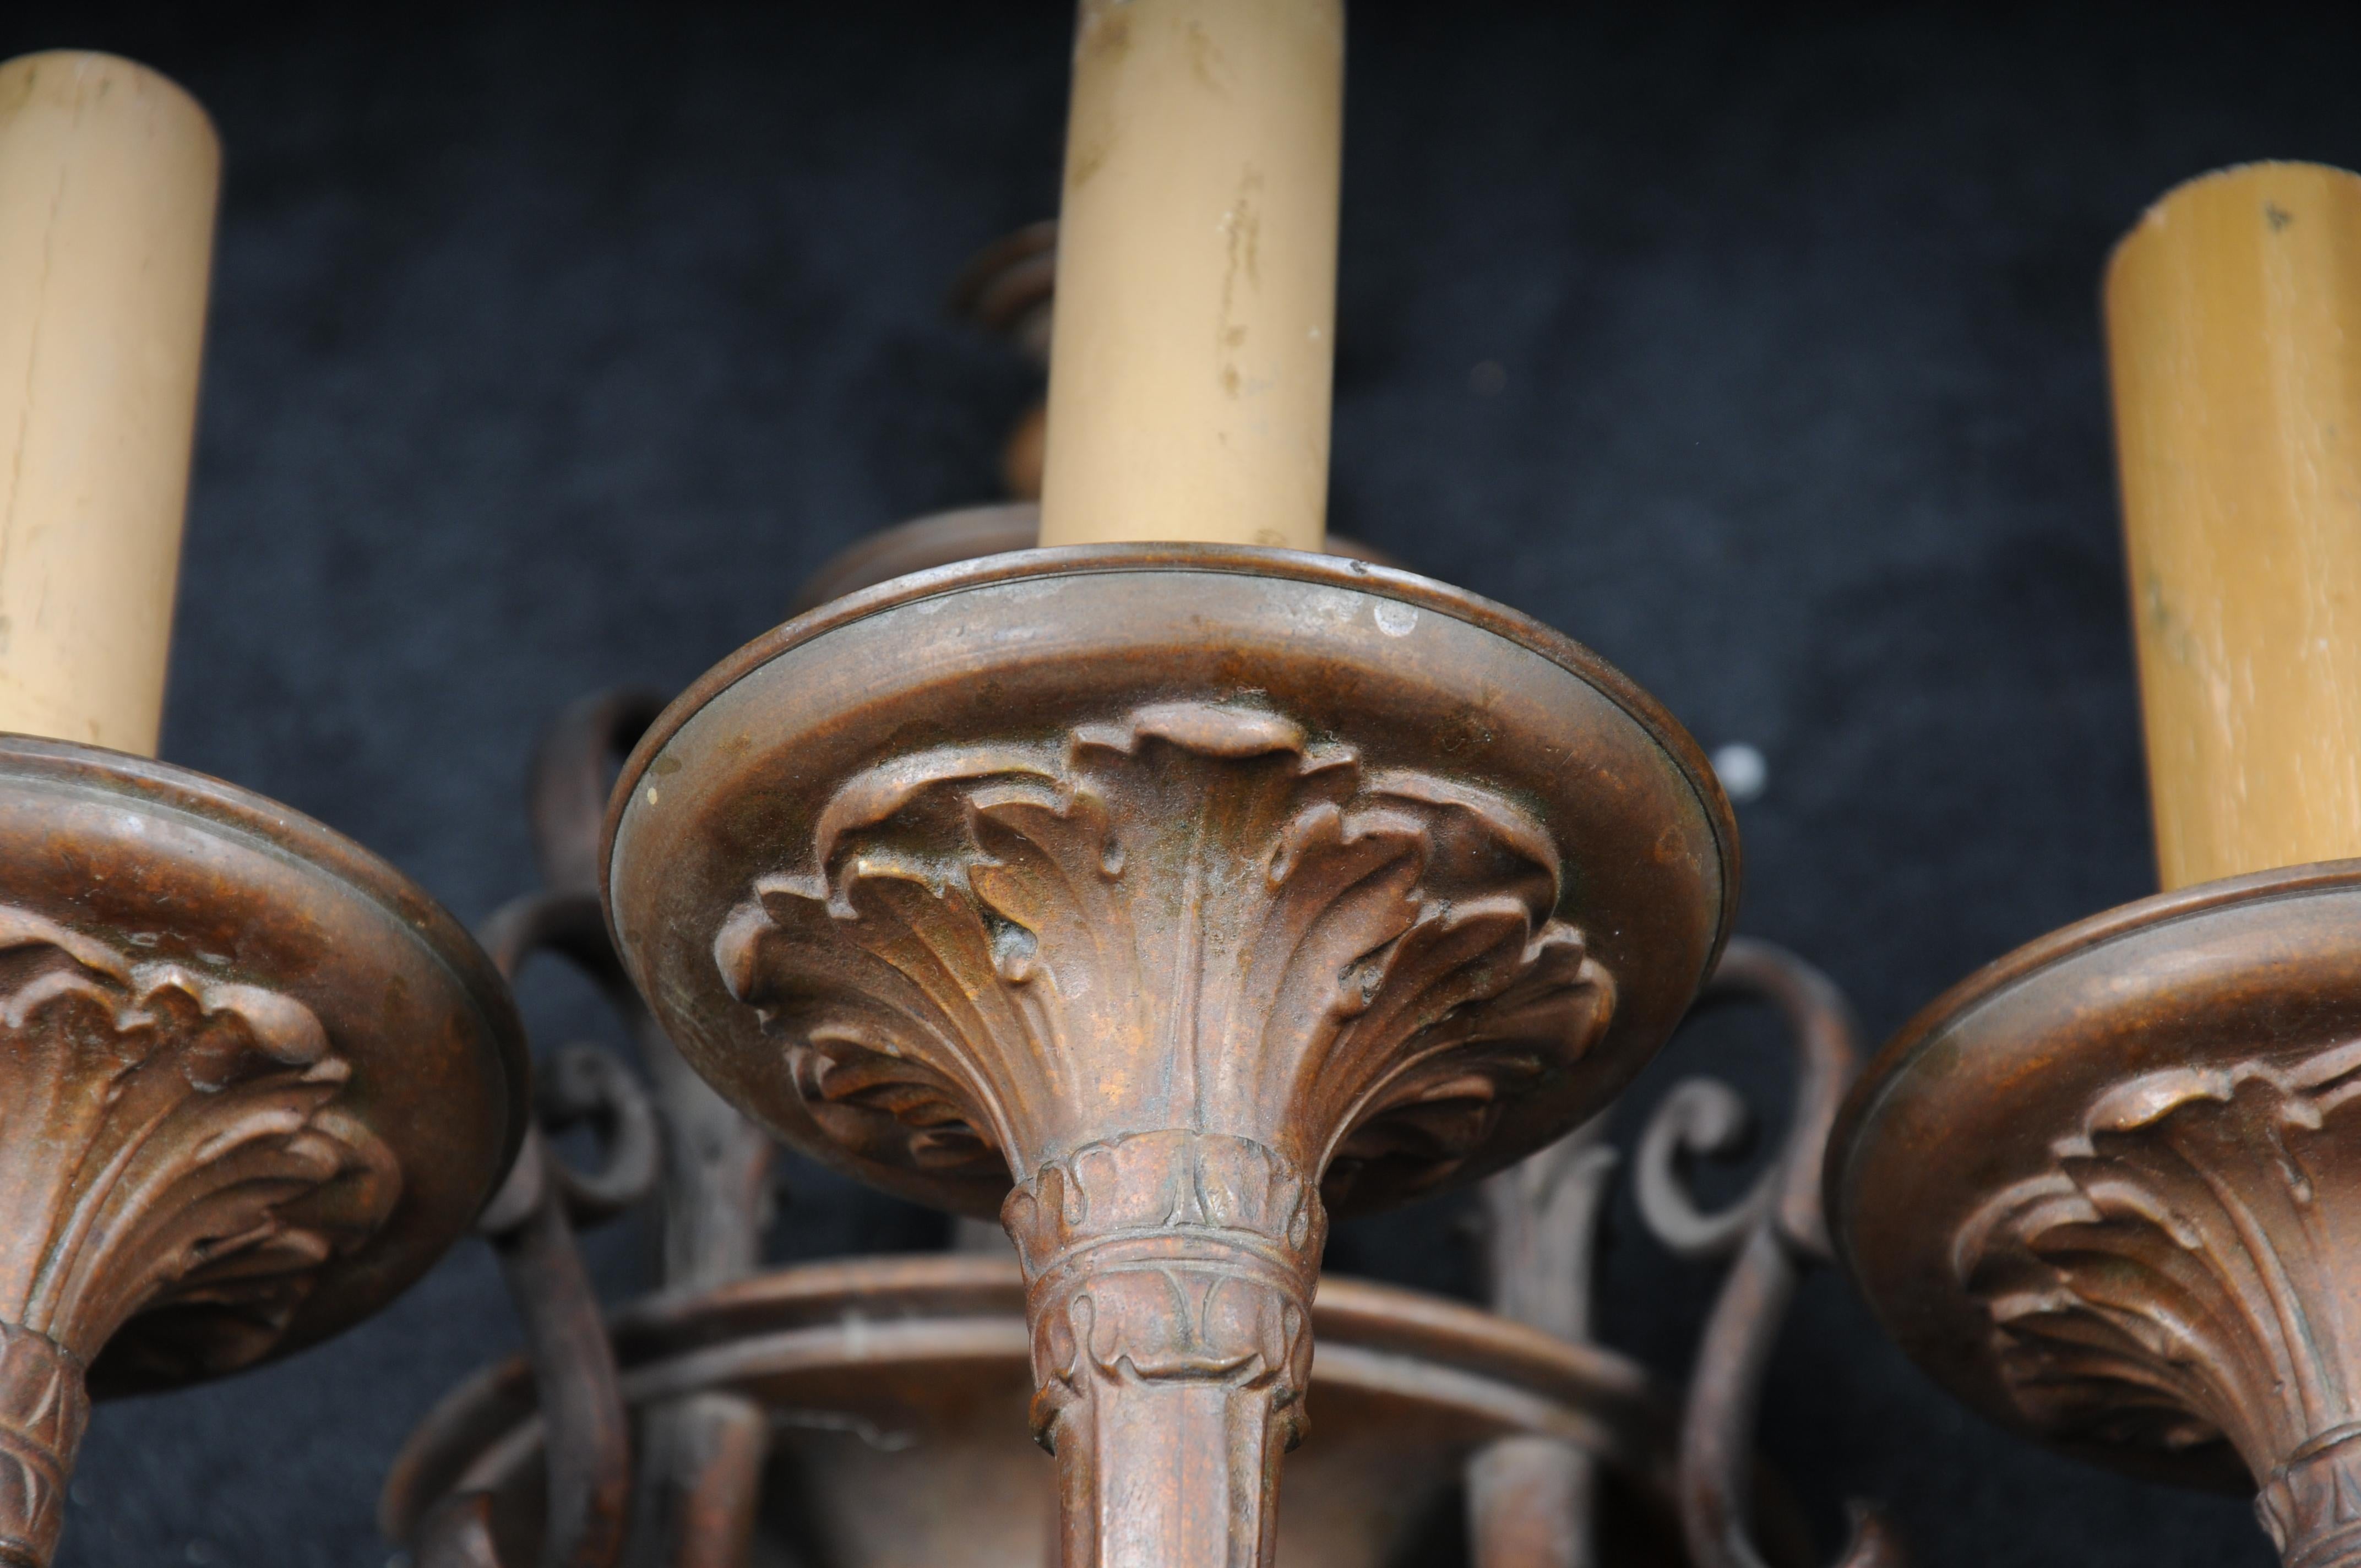 20th Beautiful Bronze Wall Lamp/Sconces in Louis XVI For Sale 3